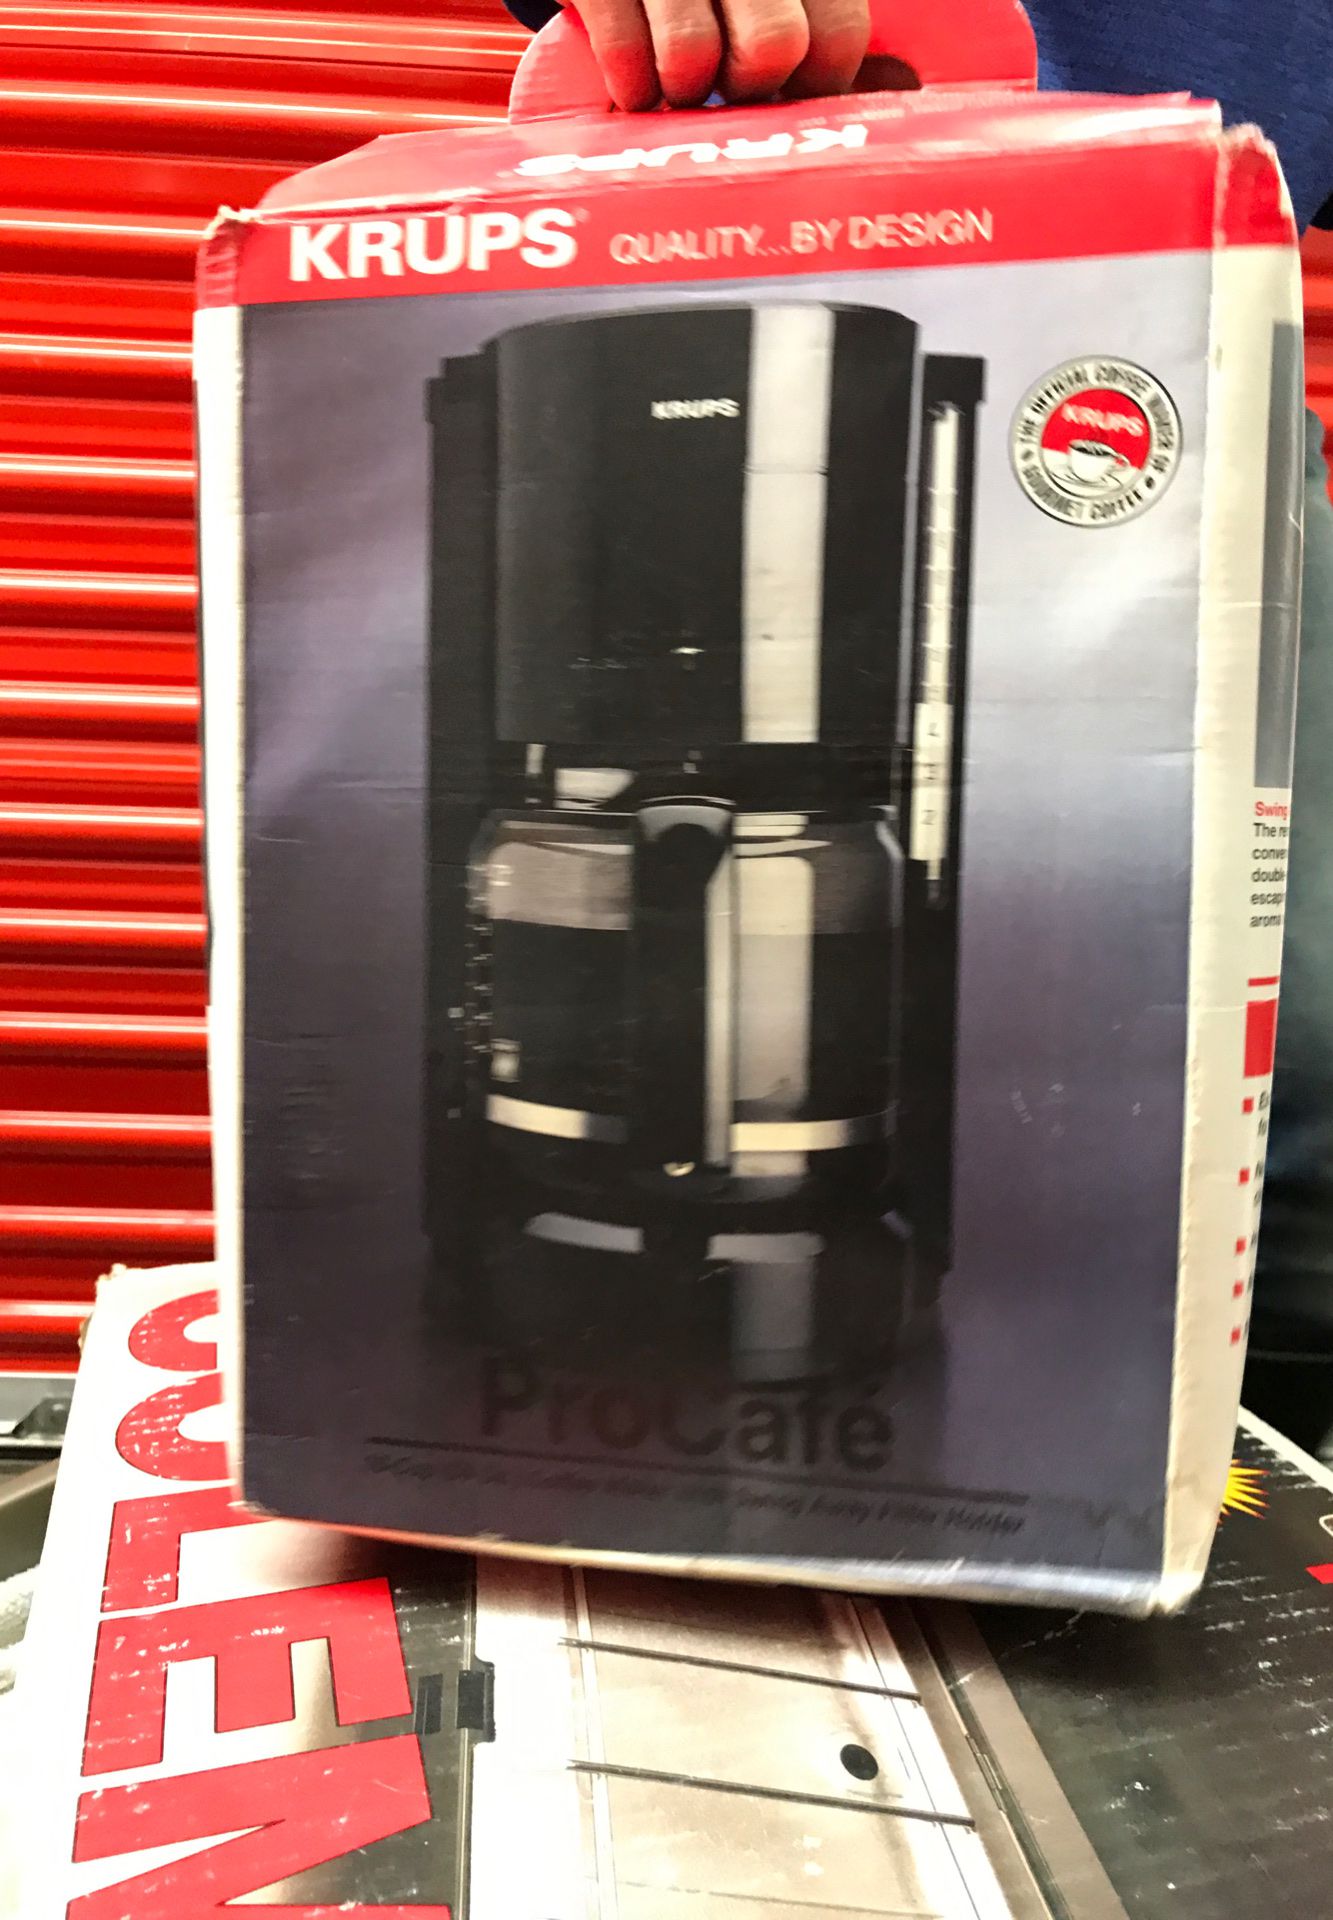 Krups Coffee maker and pot brand new never used